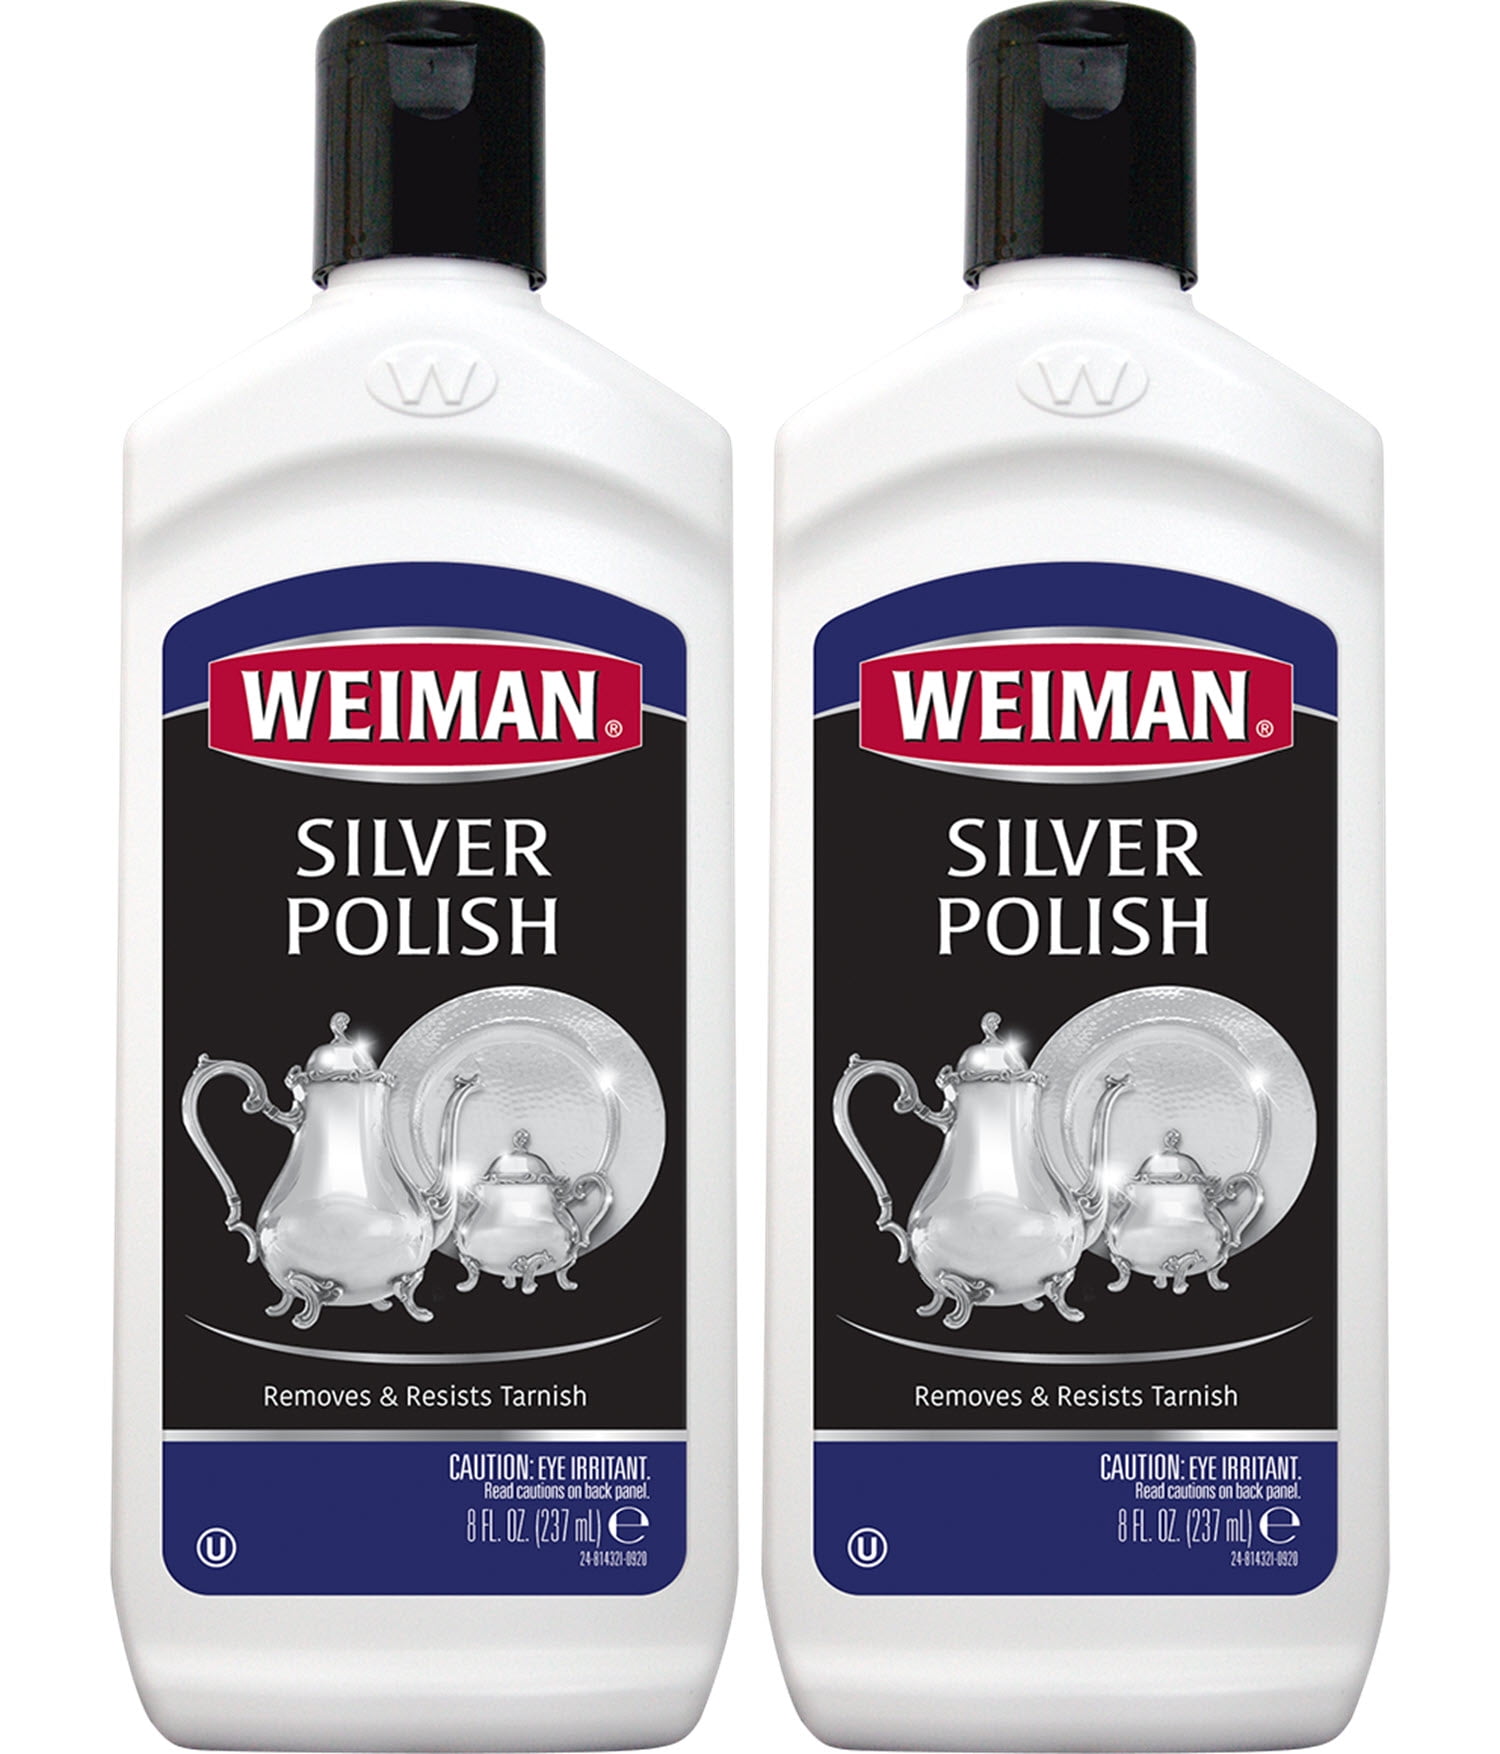 Weiman Silver Polish For Cleaning and Polishing Tarnish from Silver,  Metals, Jewelry - 8 oz (2 PACK)